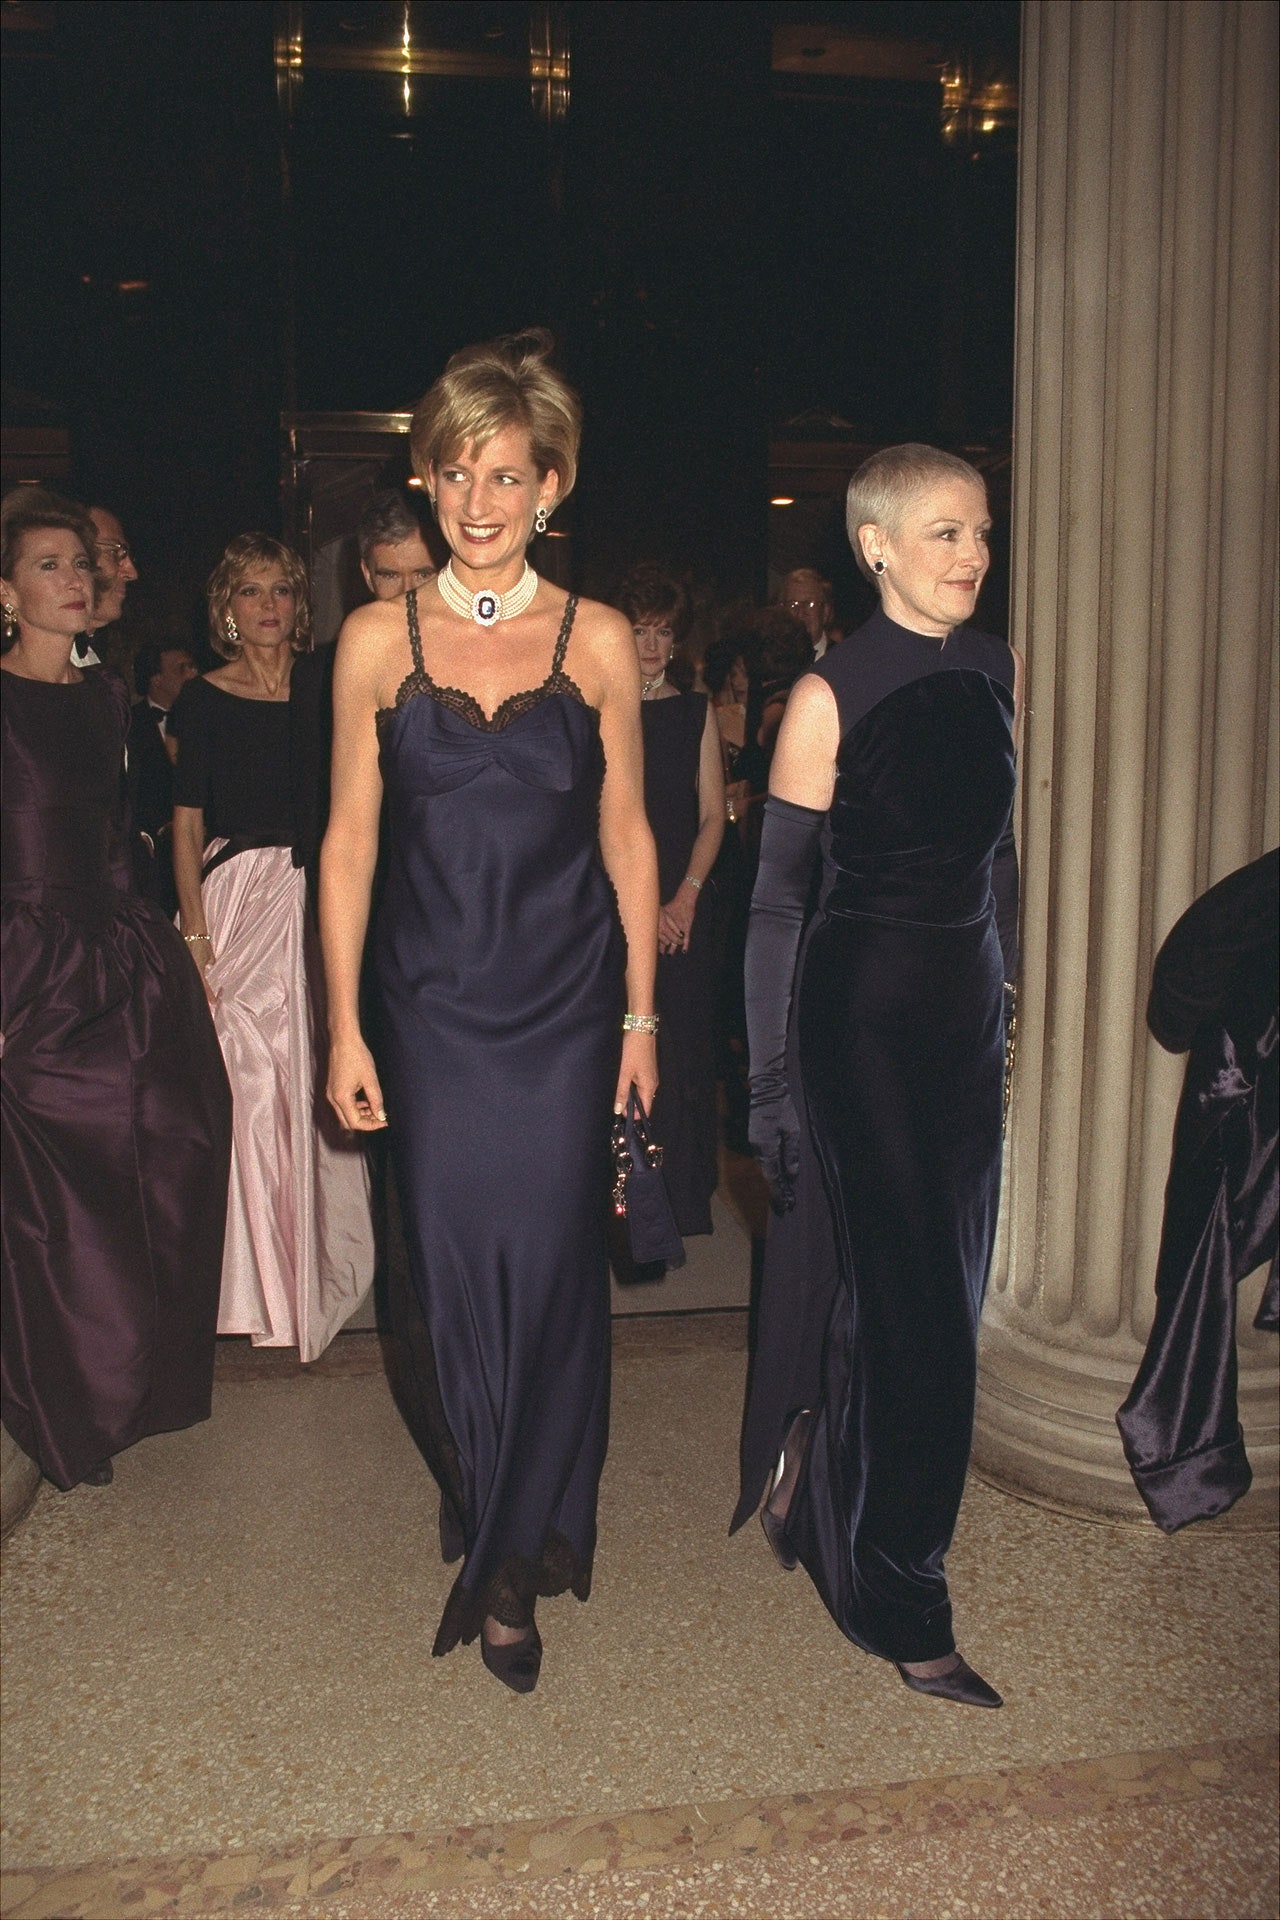 Image may contain Diana Princess of Wales Clothing Dress Formal Wear Person Evening Dress Footwear and High Heel